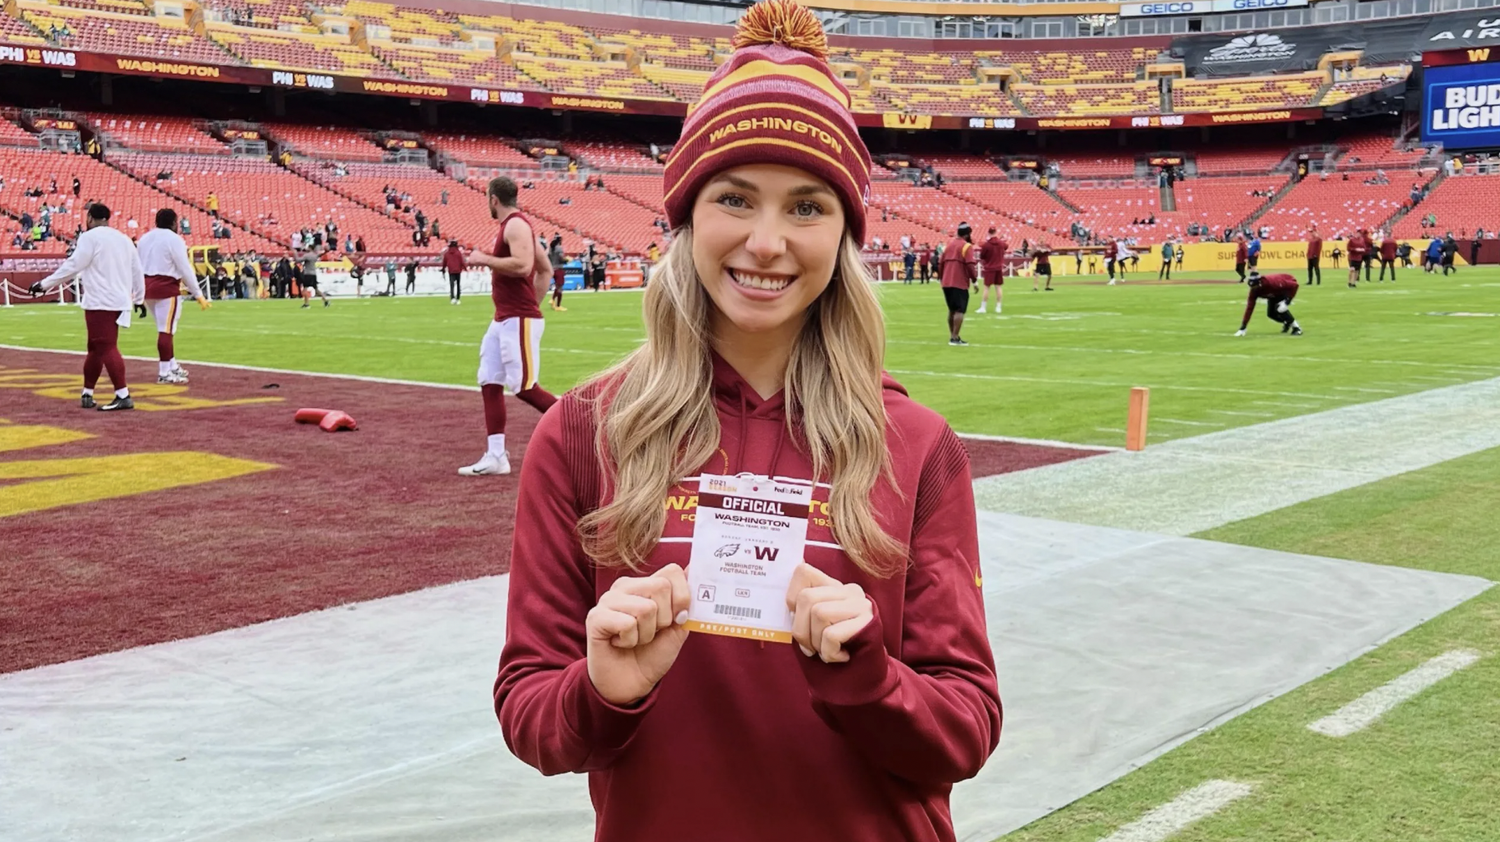 The Washington Commanders Hire Influencer Katie Feeney As Their First-Ever Social Media Correspondent